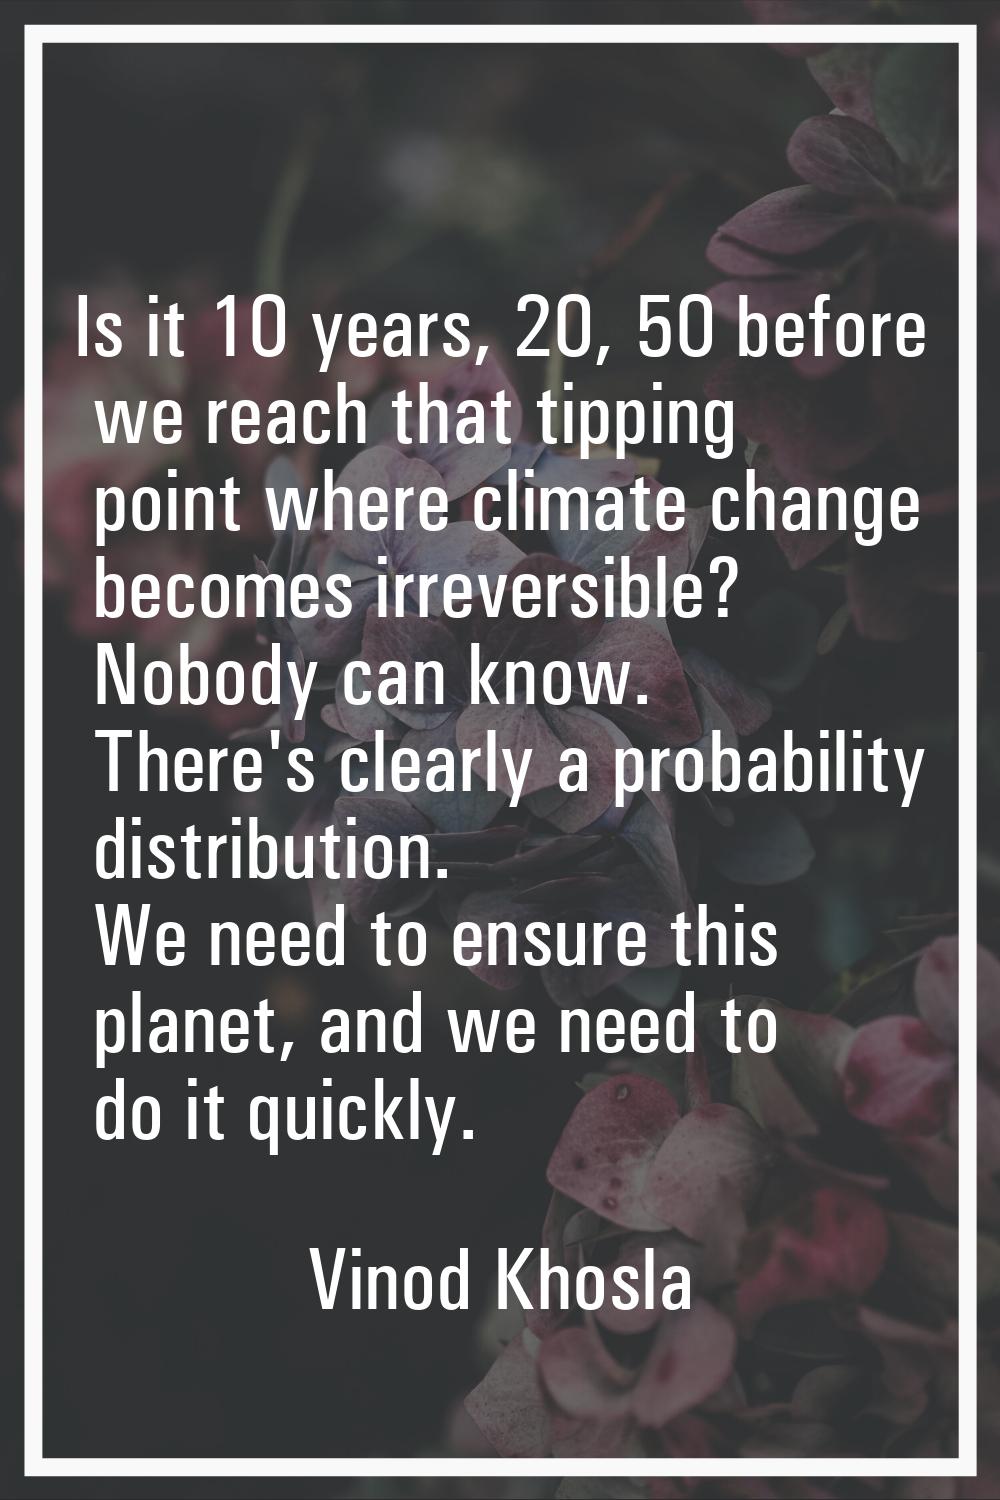 Is it 10 years, 20, 50 before we reach that tipping point where climate change becomes irreversible